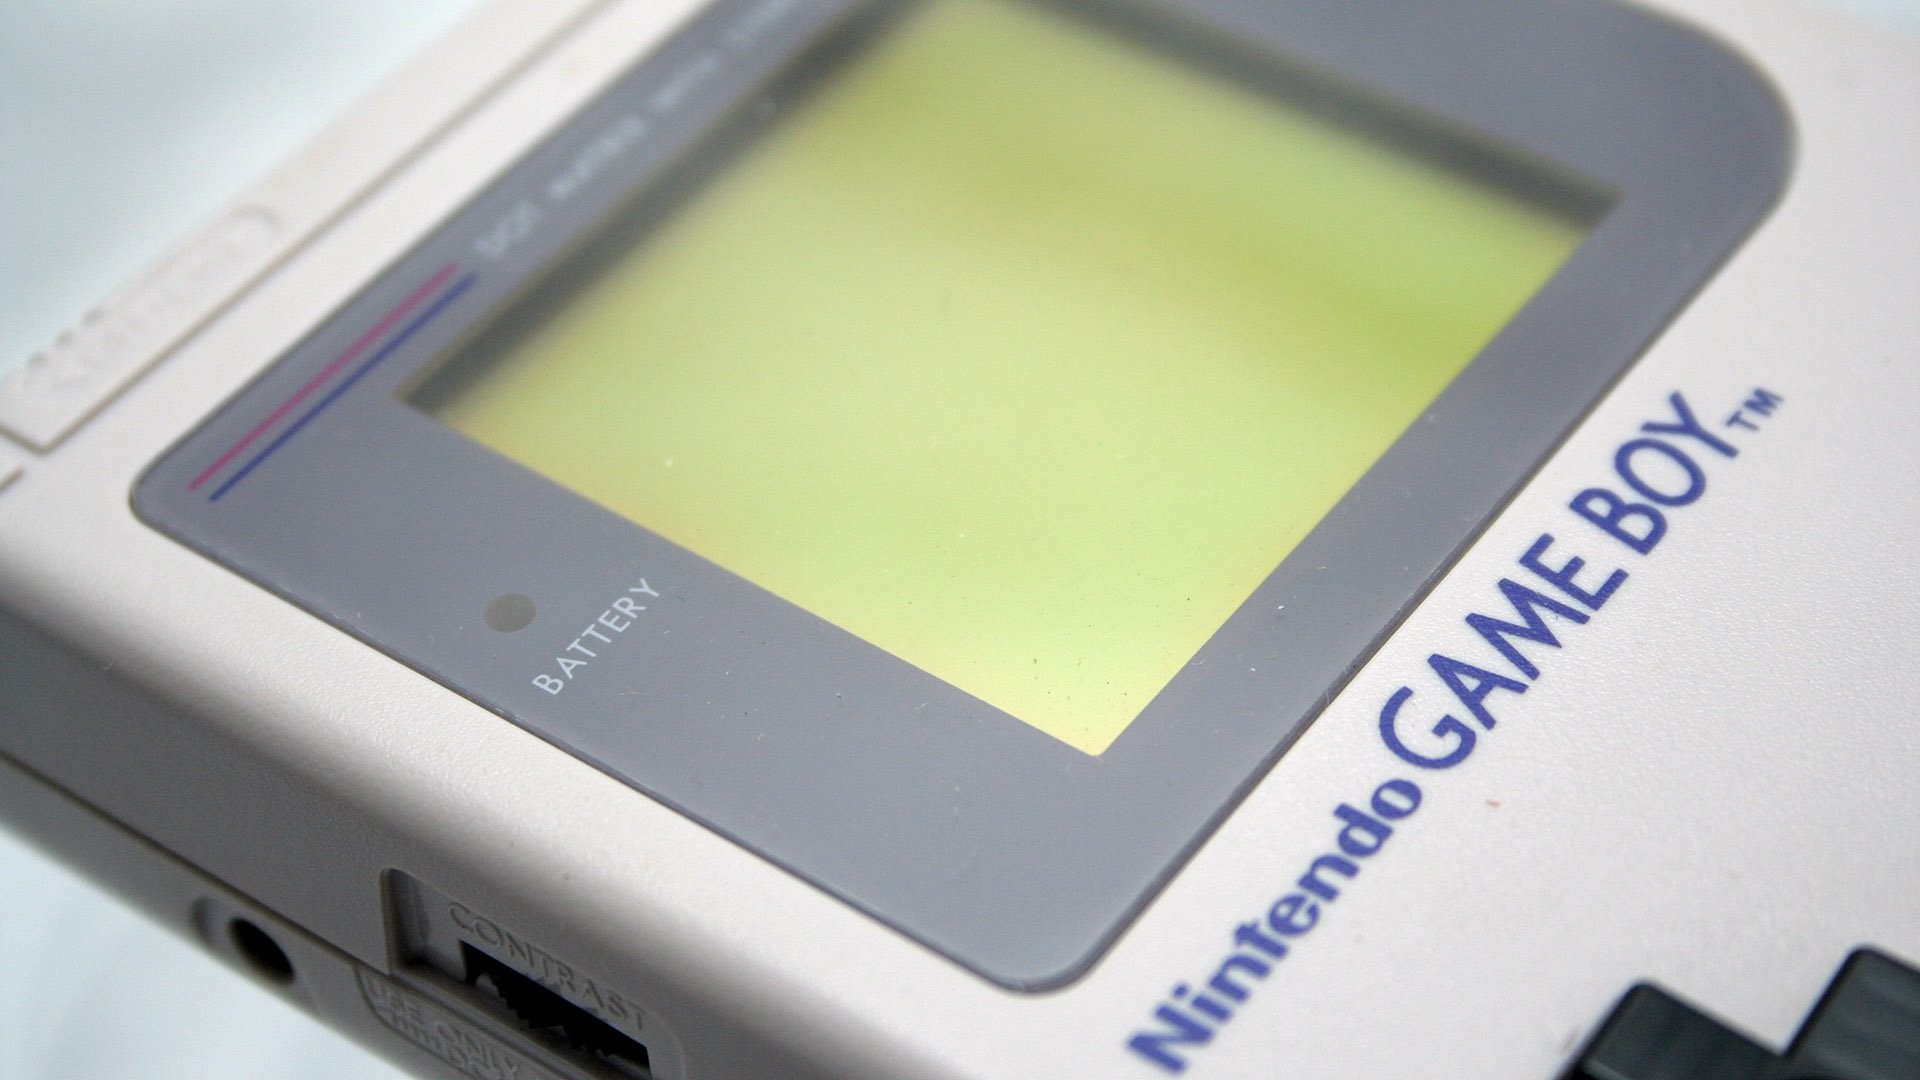 1920x1080 Rumors swirl about a Game Boy Mini, but what would that actually be? |  Retronauts